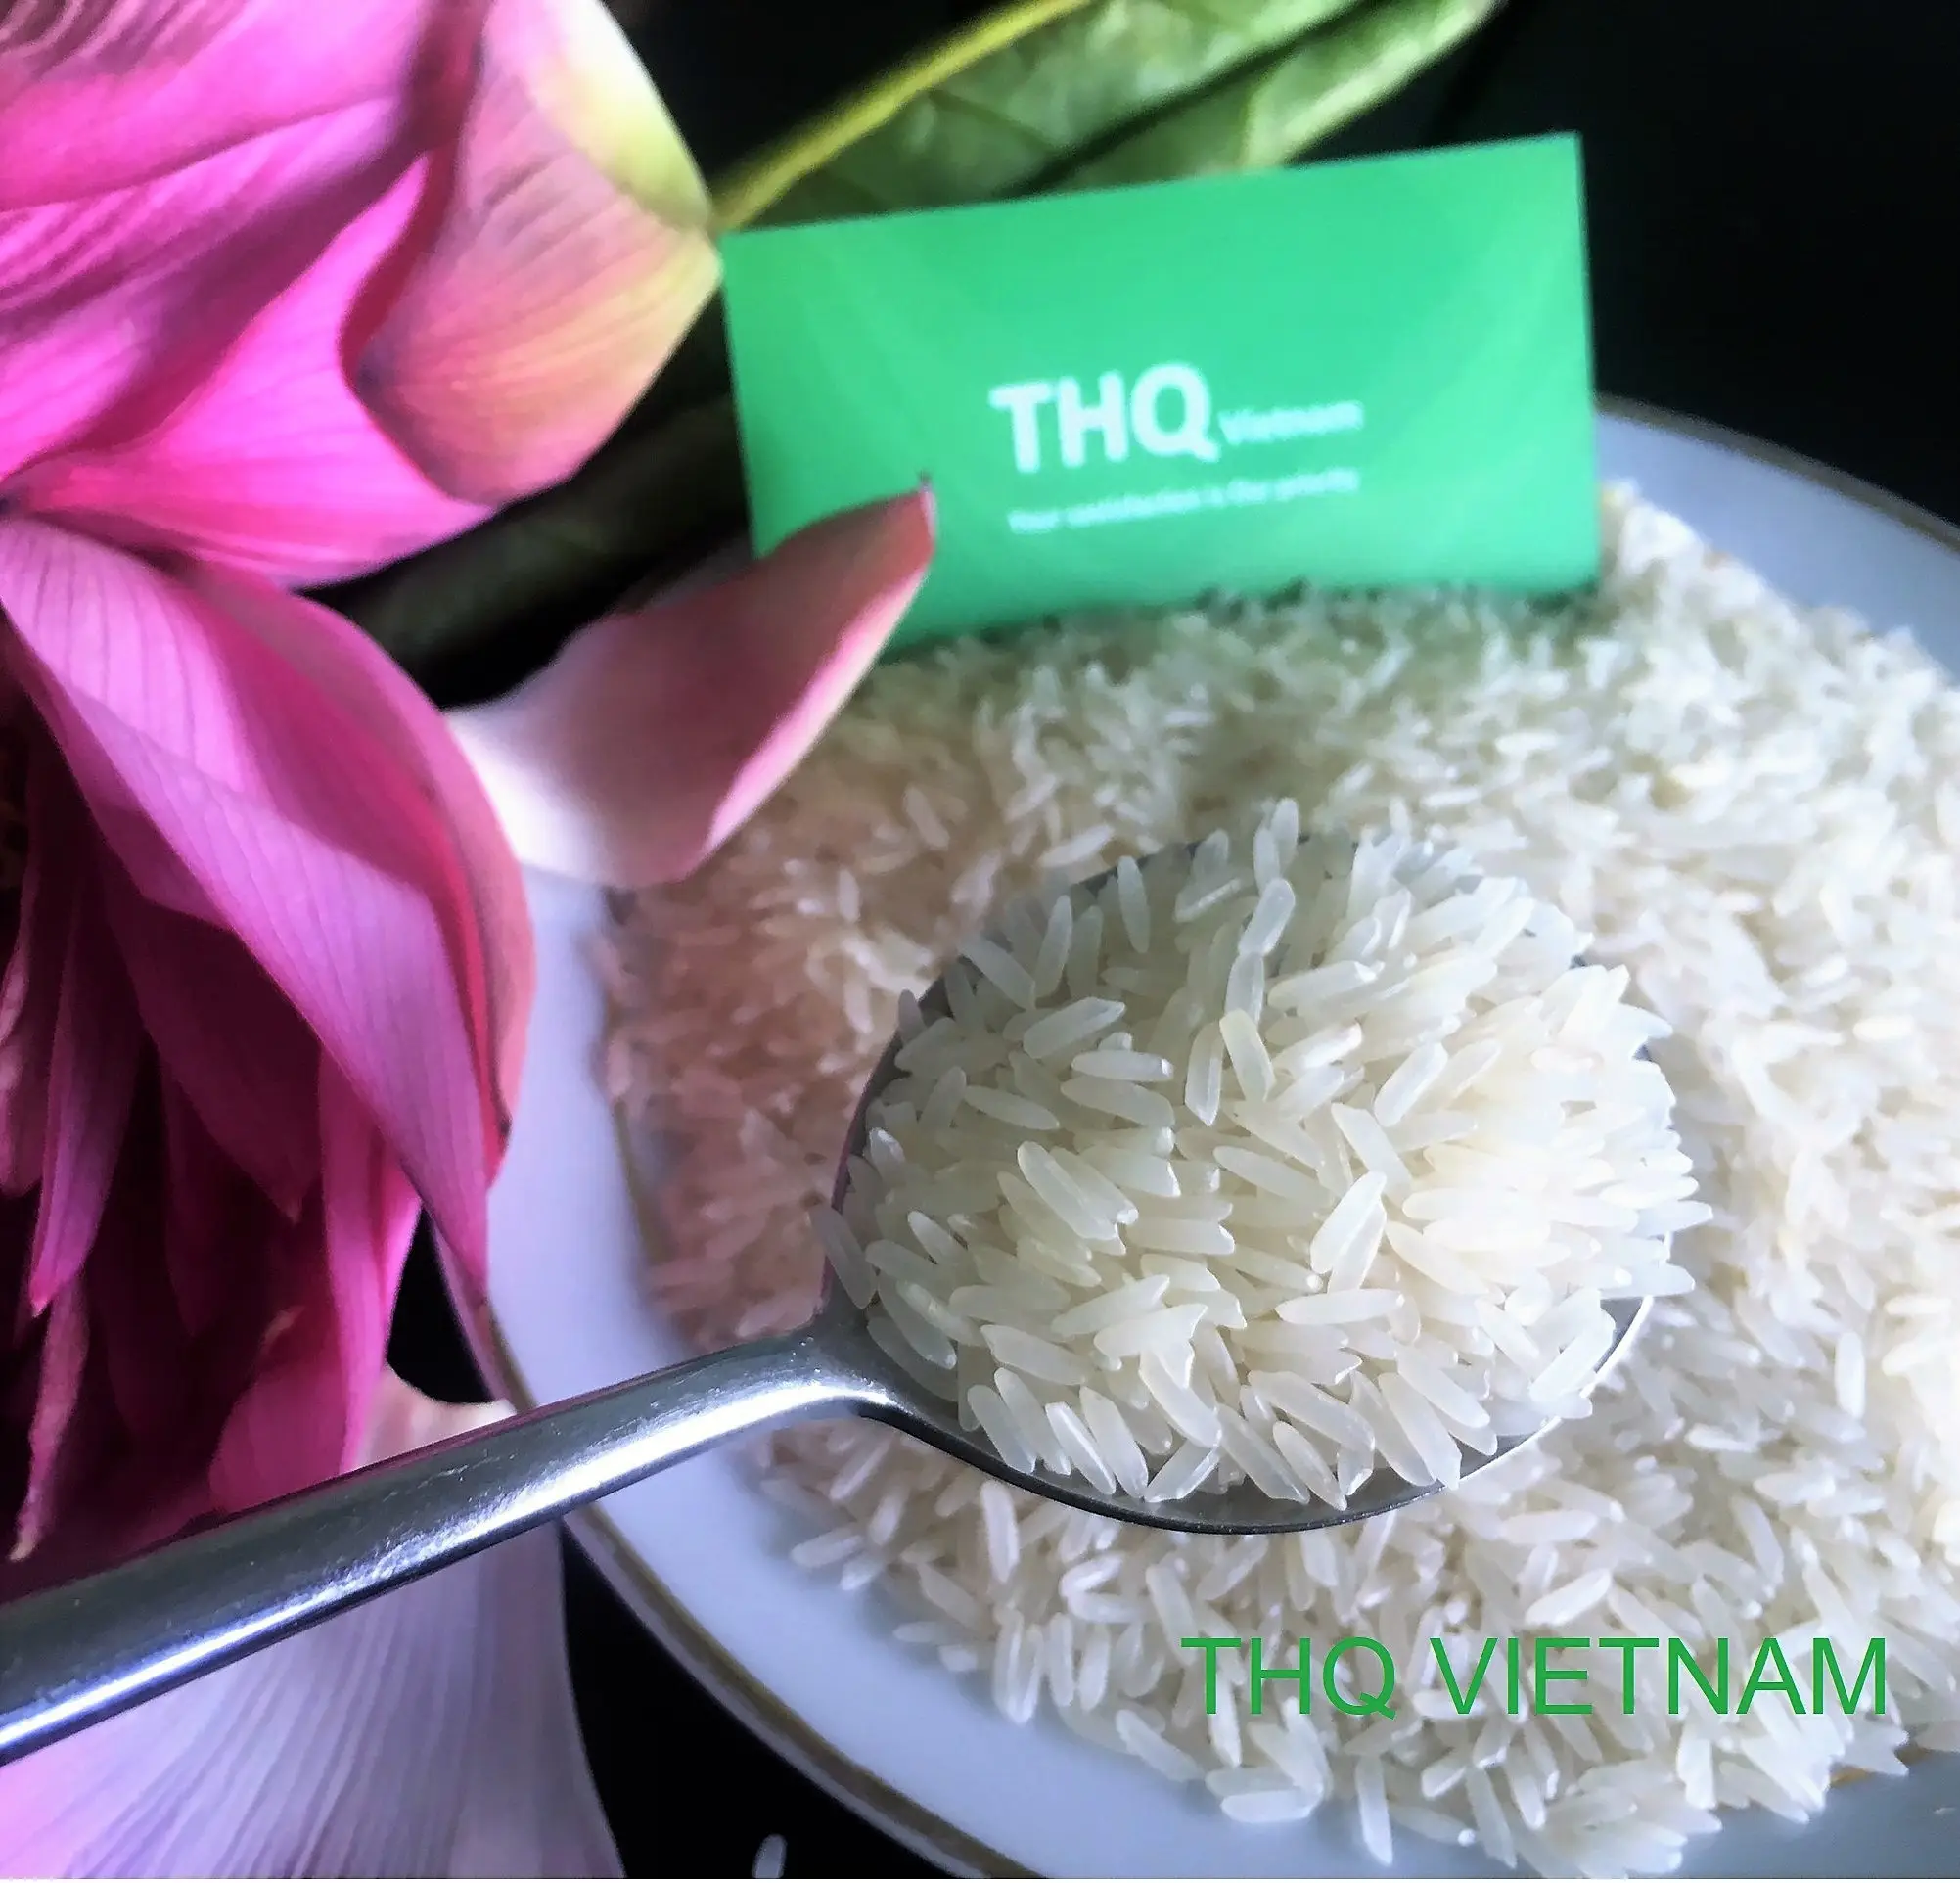 [THQ VIETNAM] THE BEST JASMINE RICE - LONG GRAIN WHITE RICE/ ST24 WITH CHEAP PRICE (Ms. Rose: +84 977 610 525)